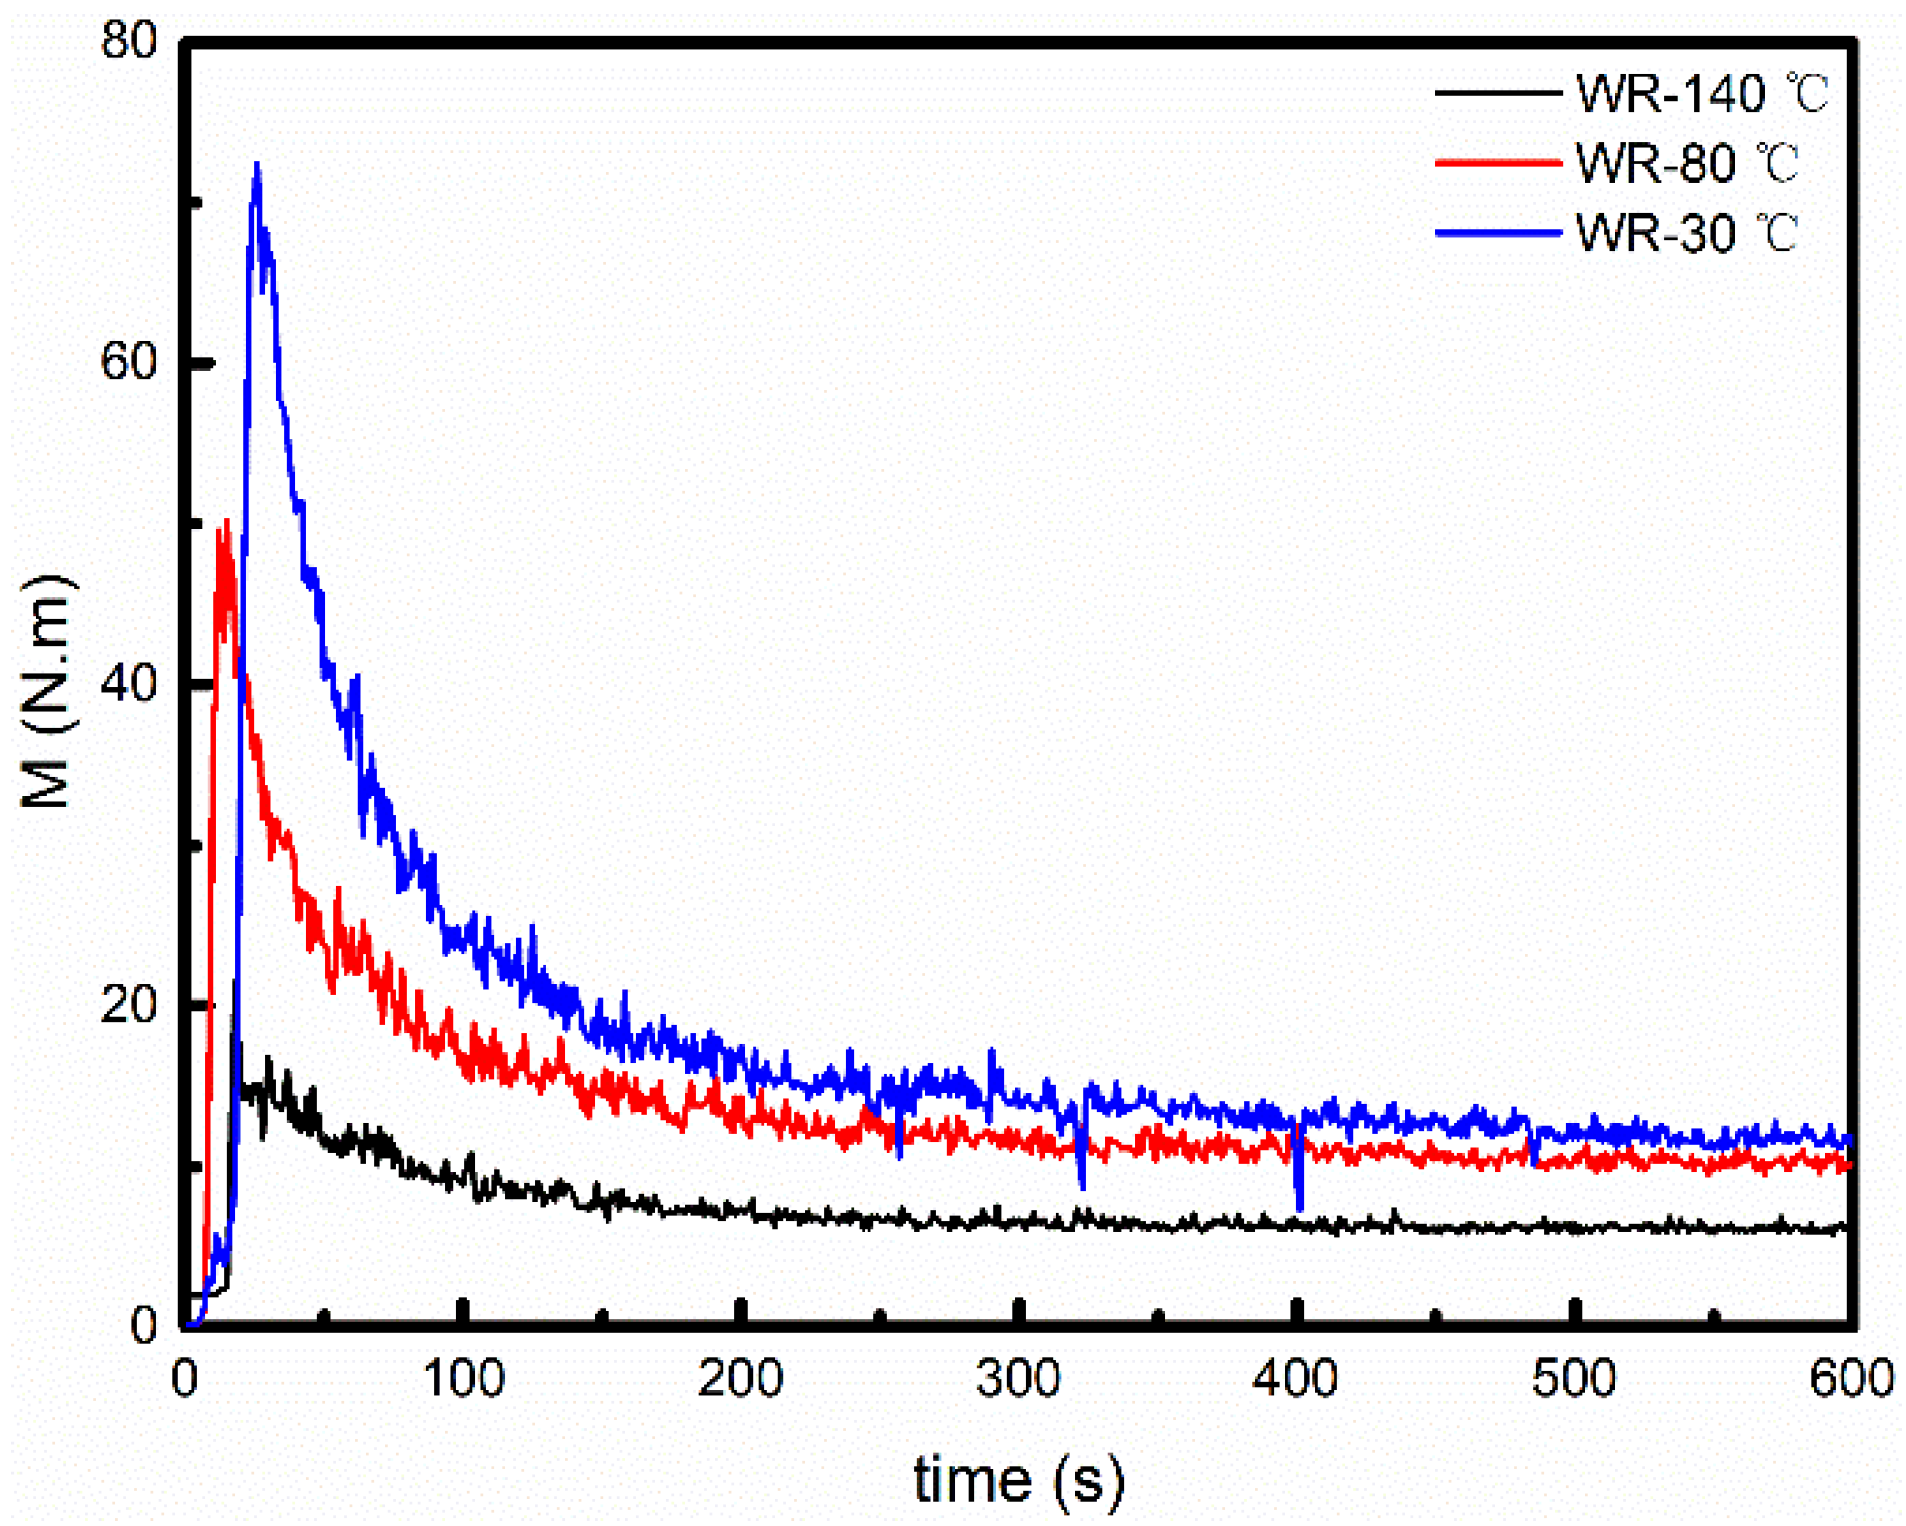 Torque (M) of the WR samples as a function of the grinding time at different temperature.